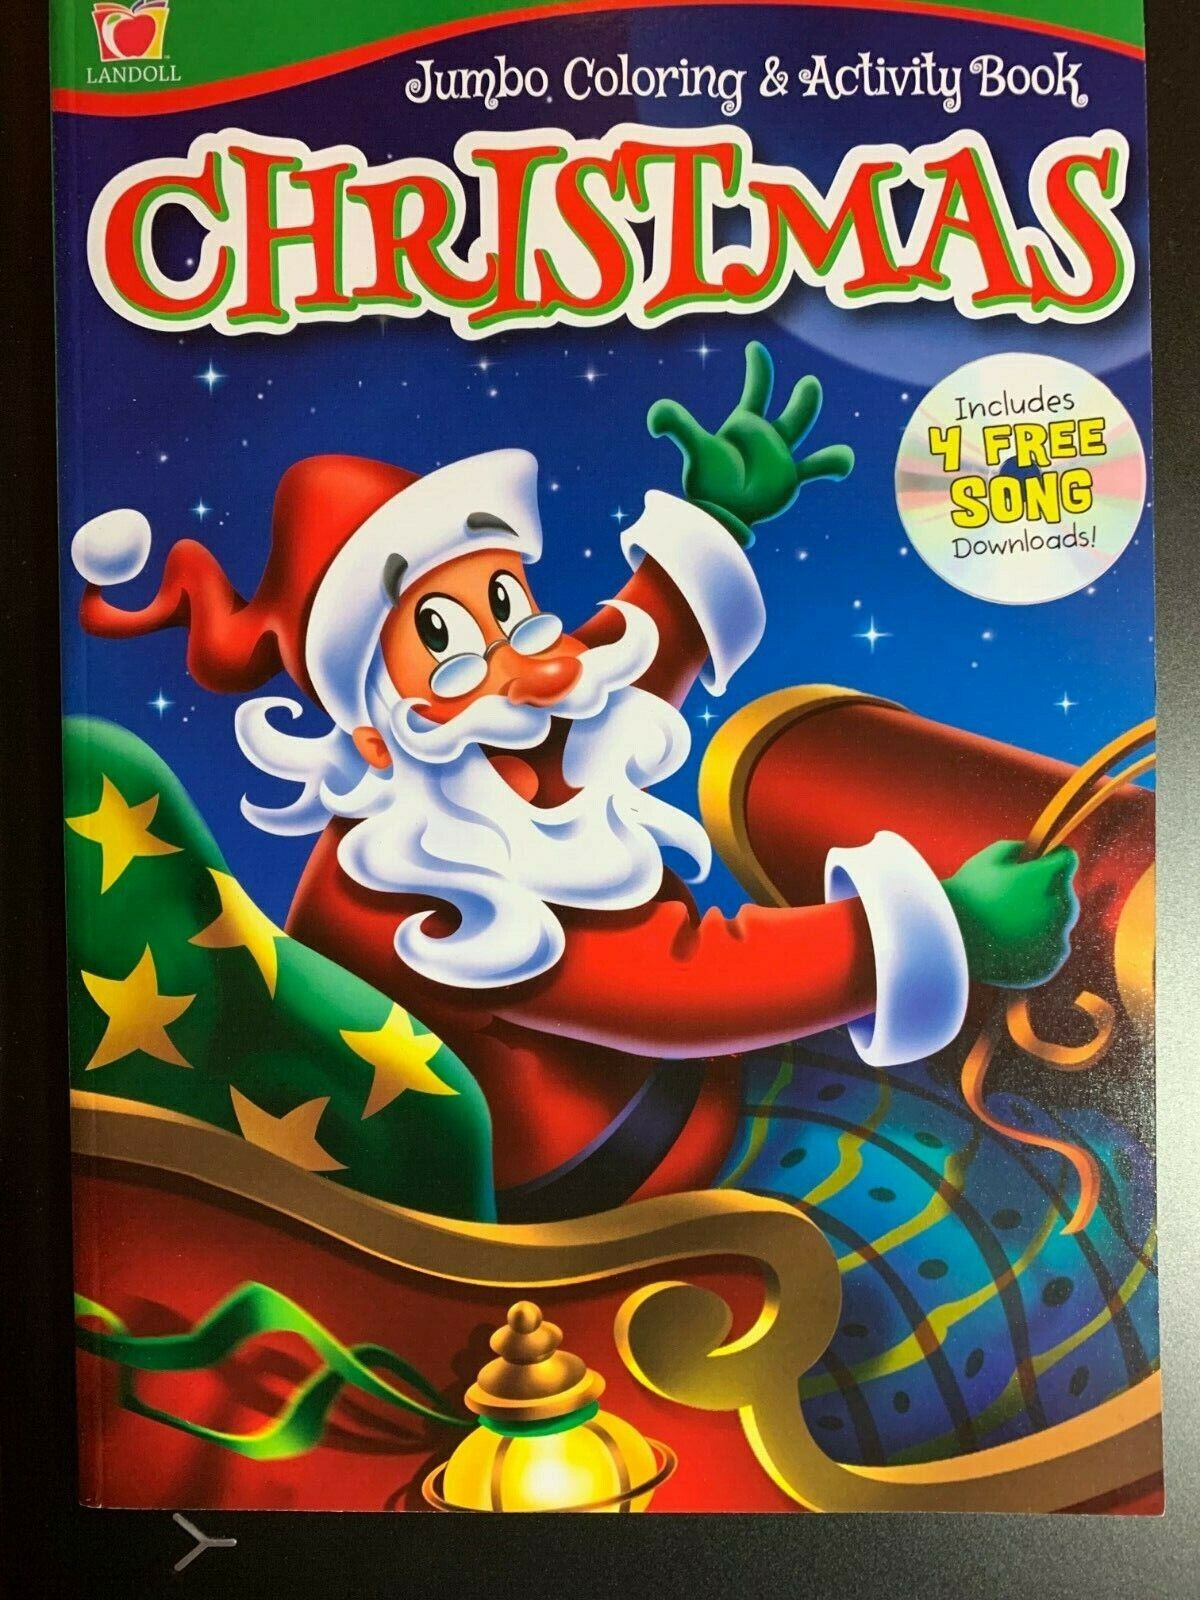 CHRISTMAS JUMBO COLORING & ACTIVITY BOOK, WITH 4 HOLIDAY SONG DOWNLOADS  SLED 858476005971 | eBay